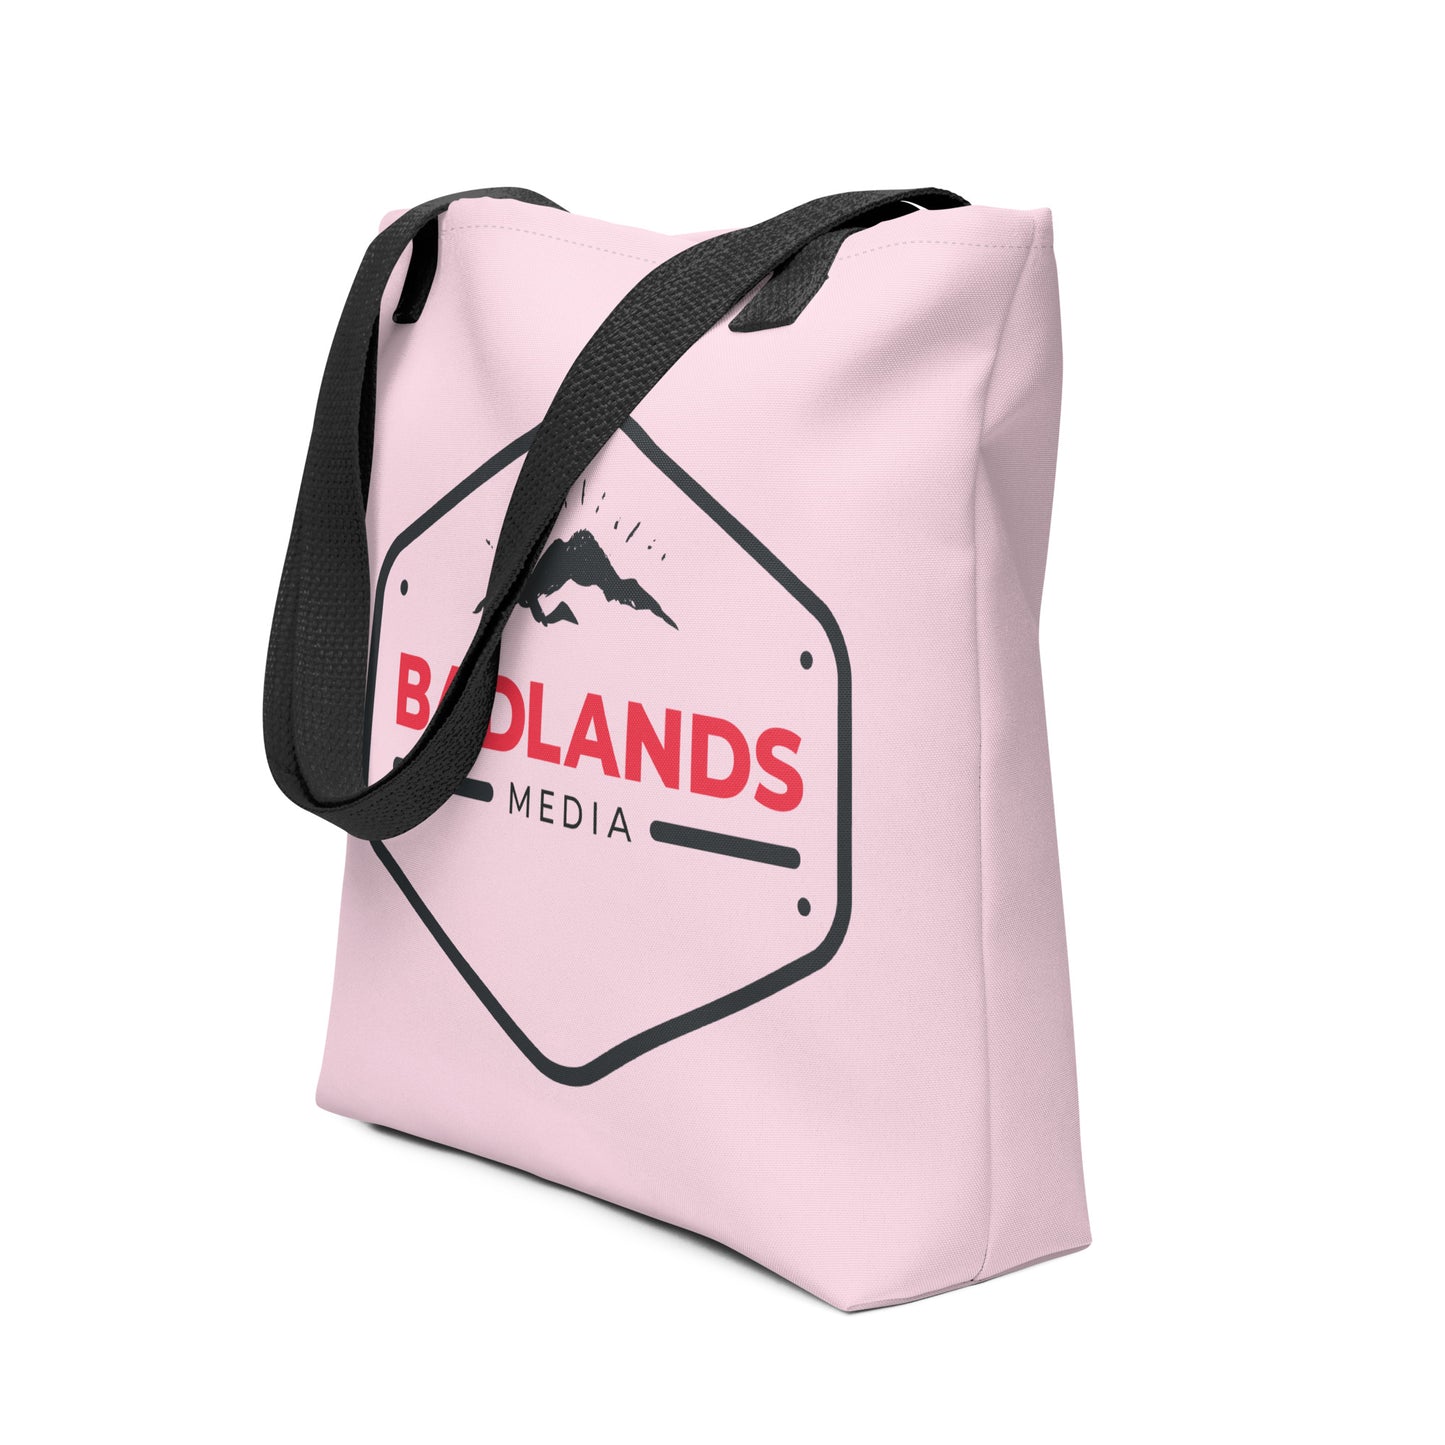 Badlands Tote Bag in cotton candy